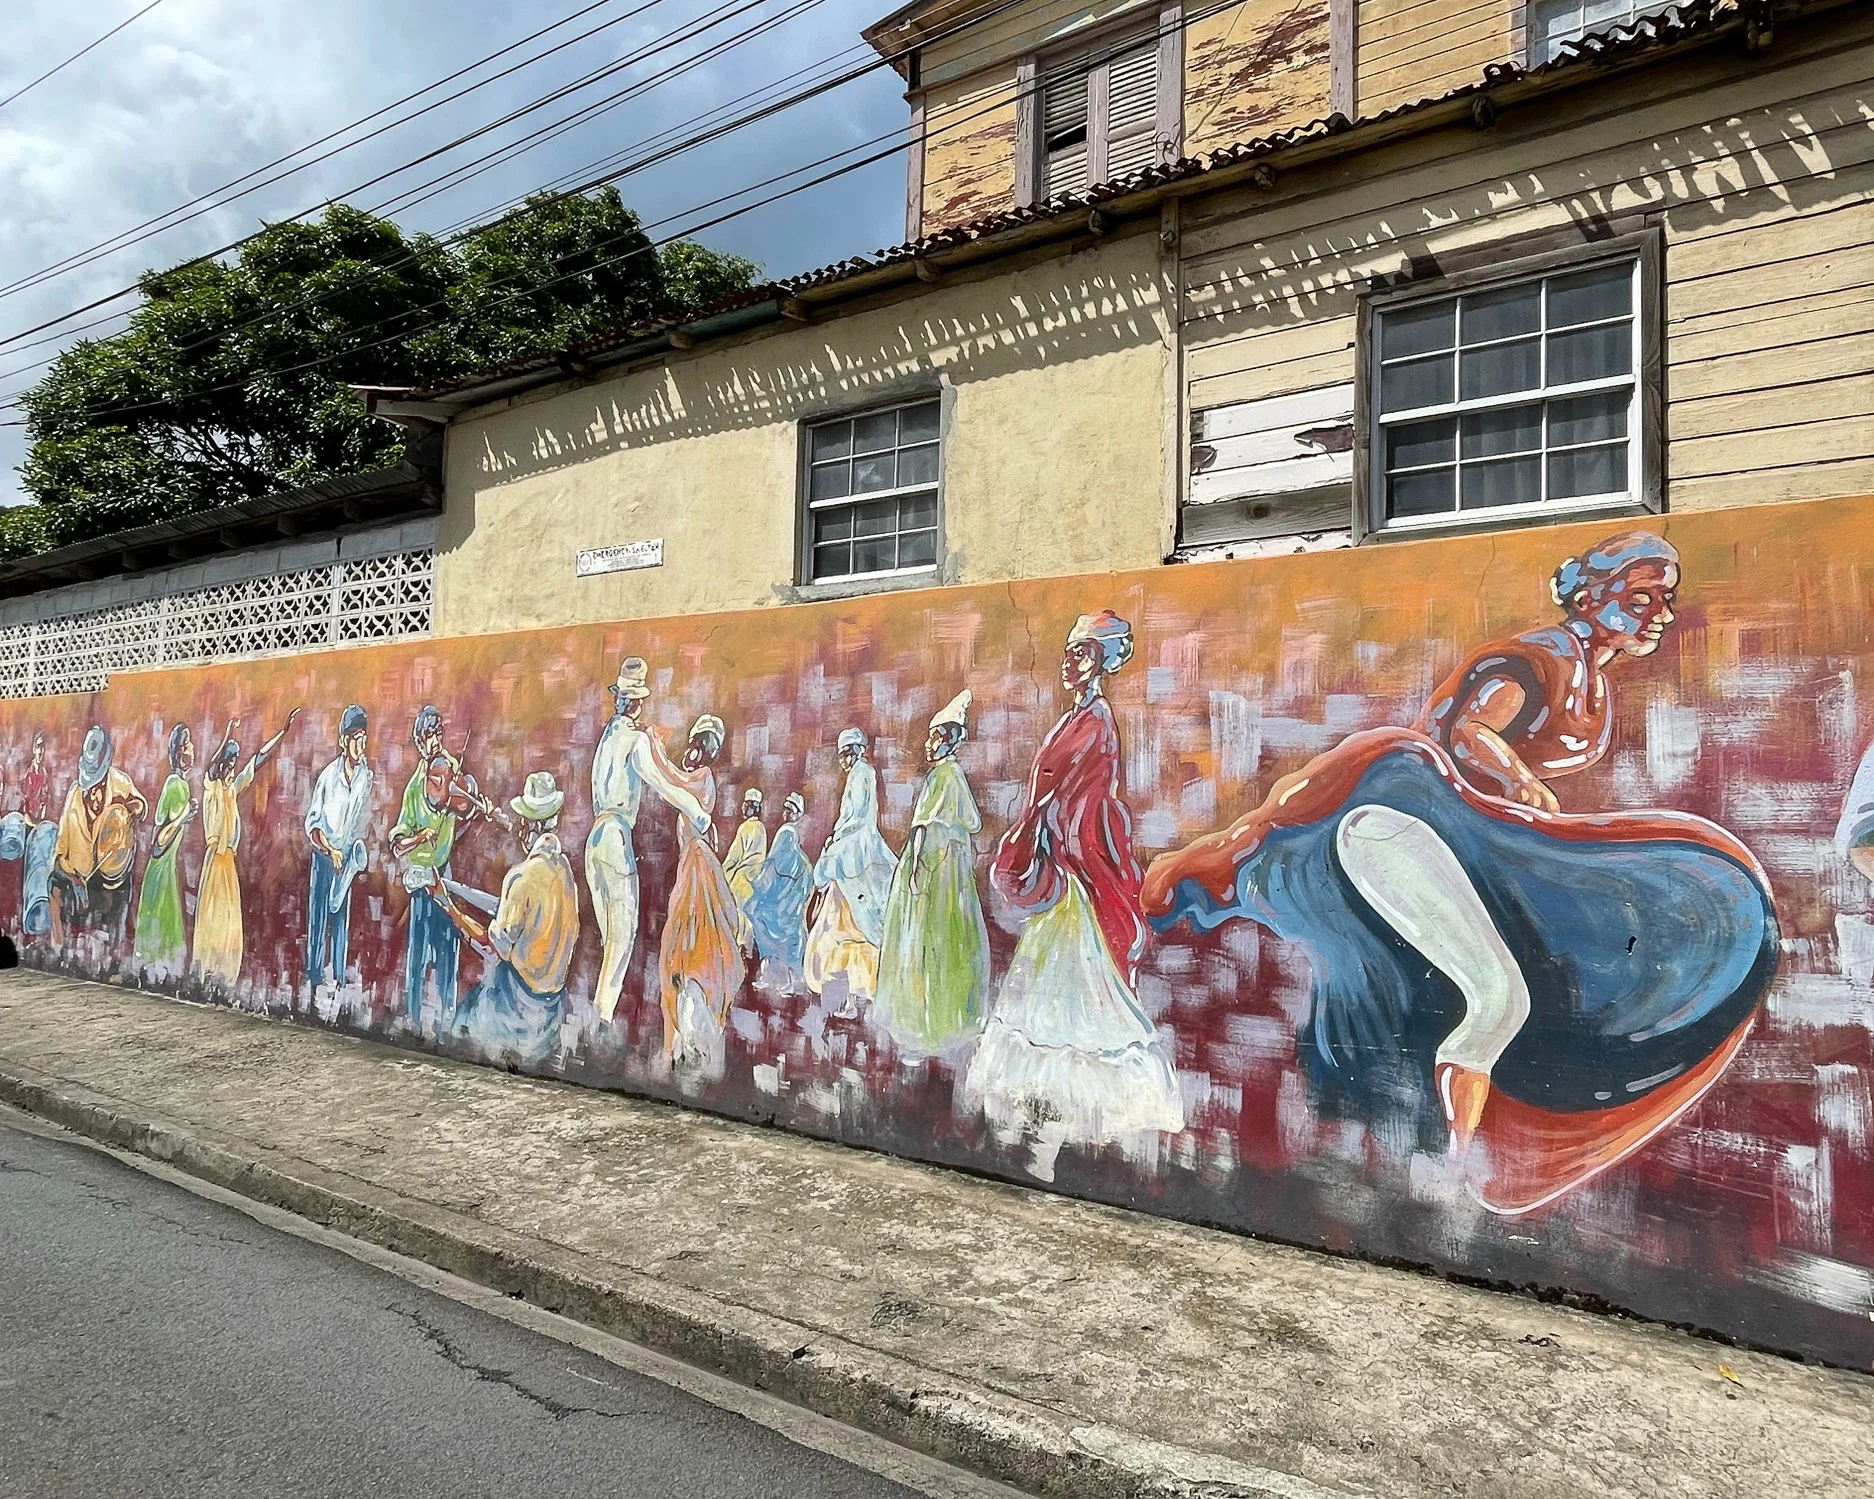 Saint Lucia artists - murals and galleries in St Lucia